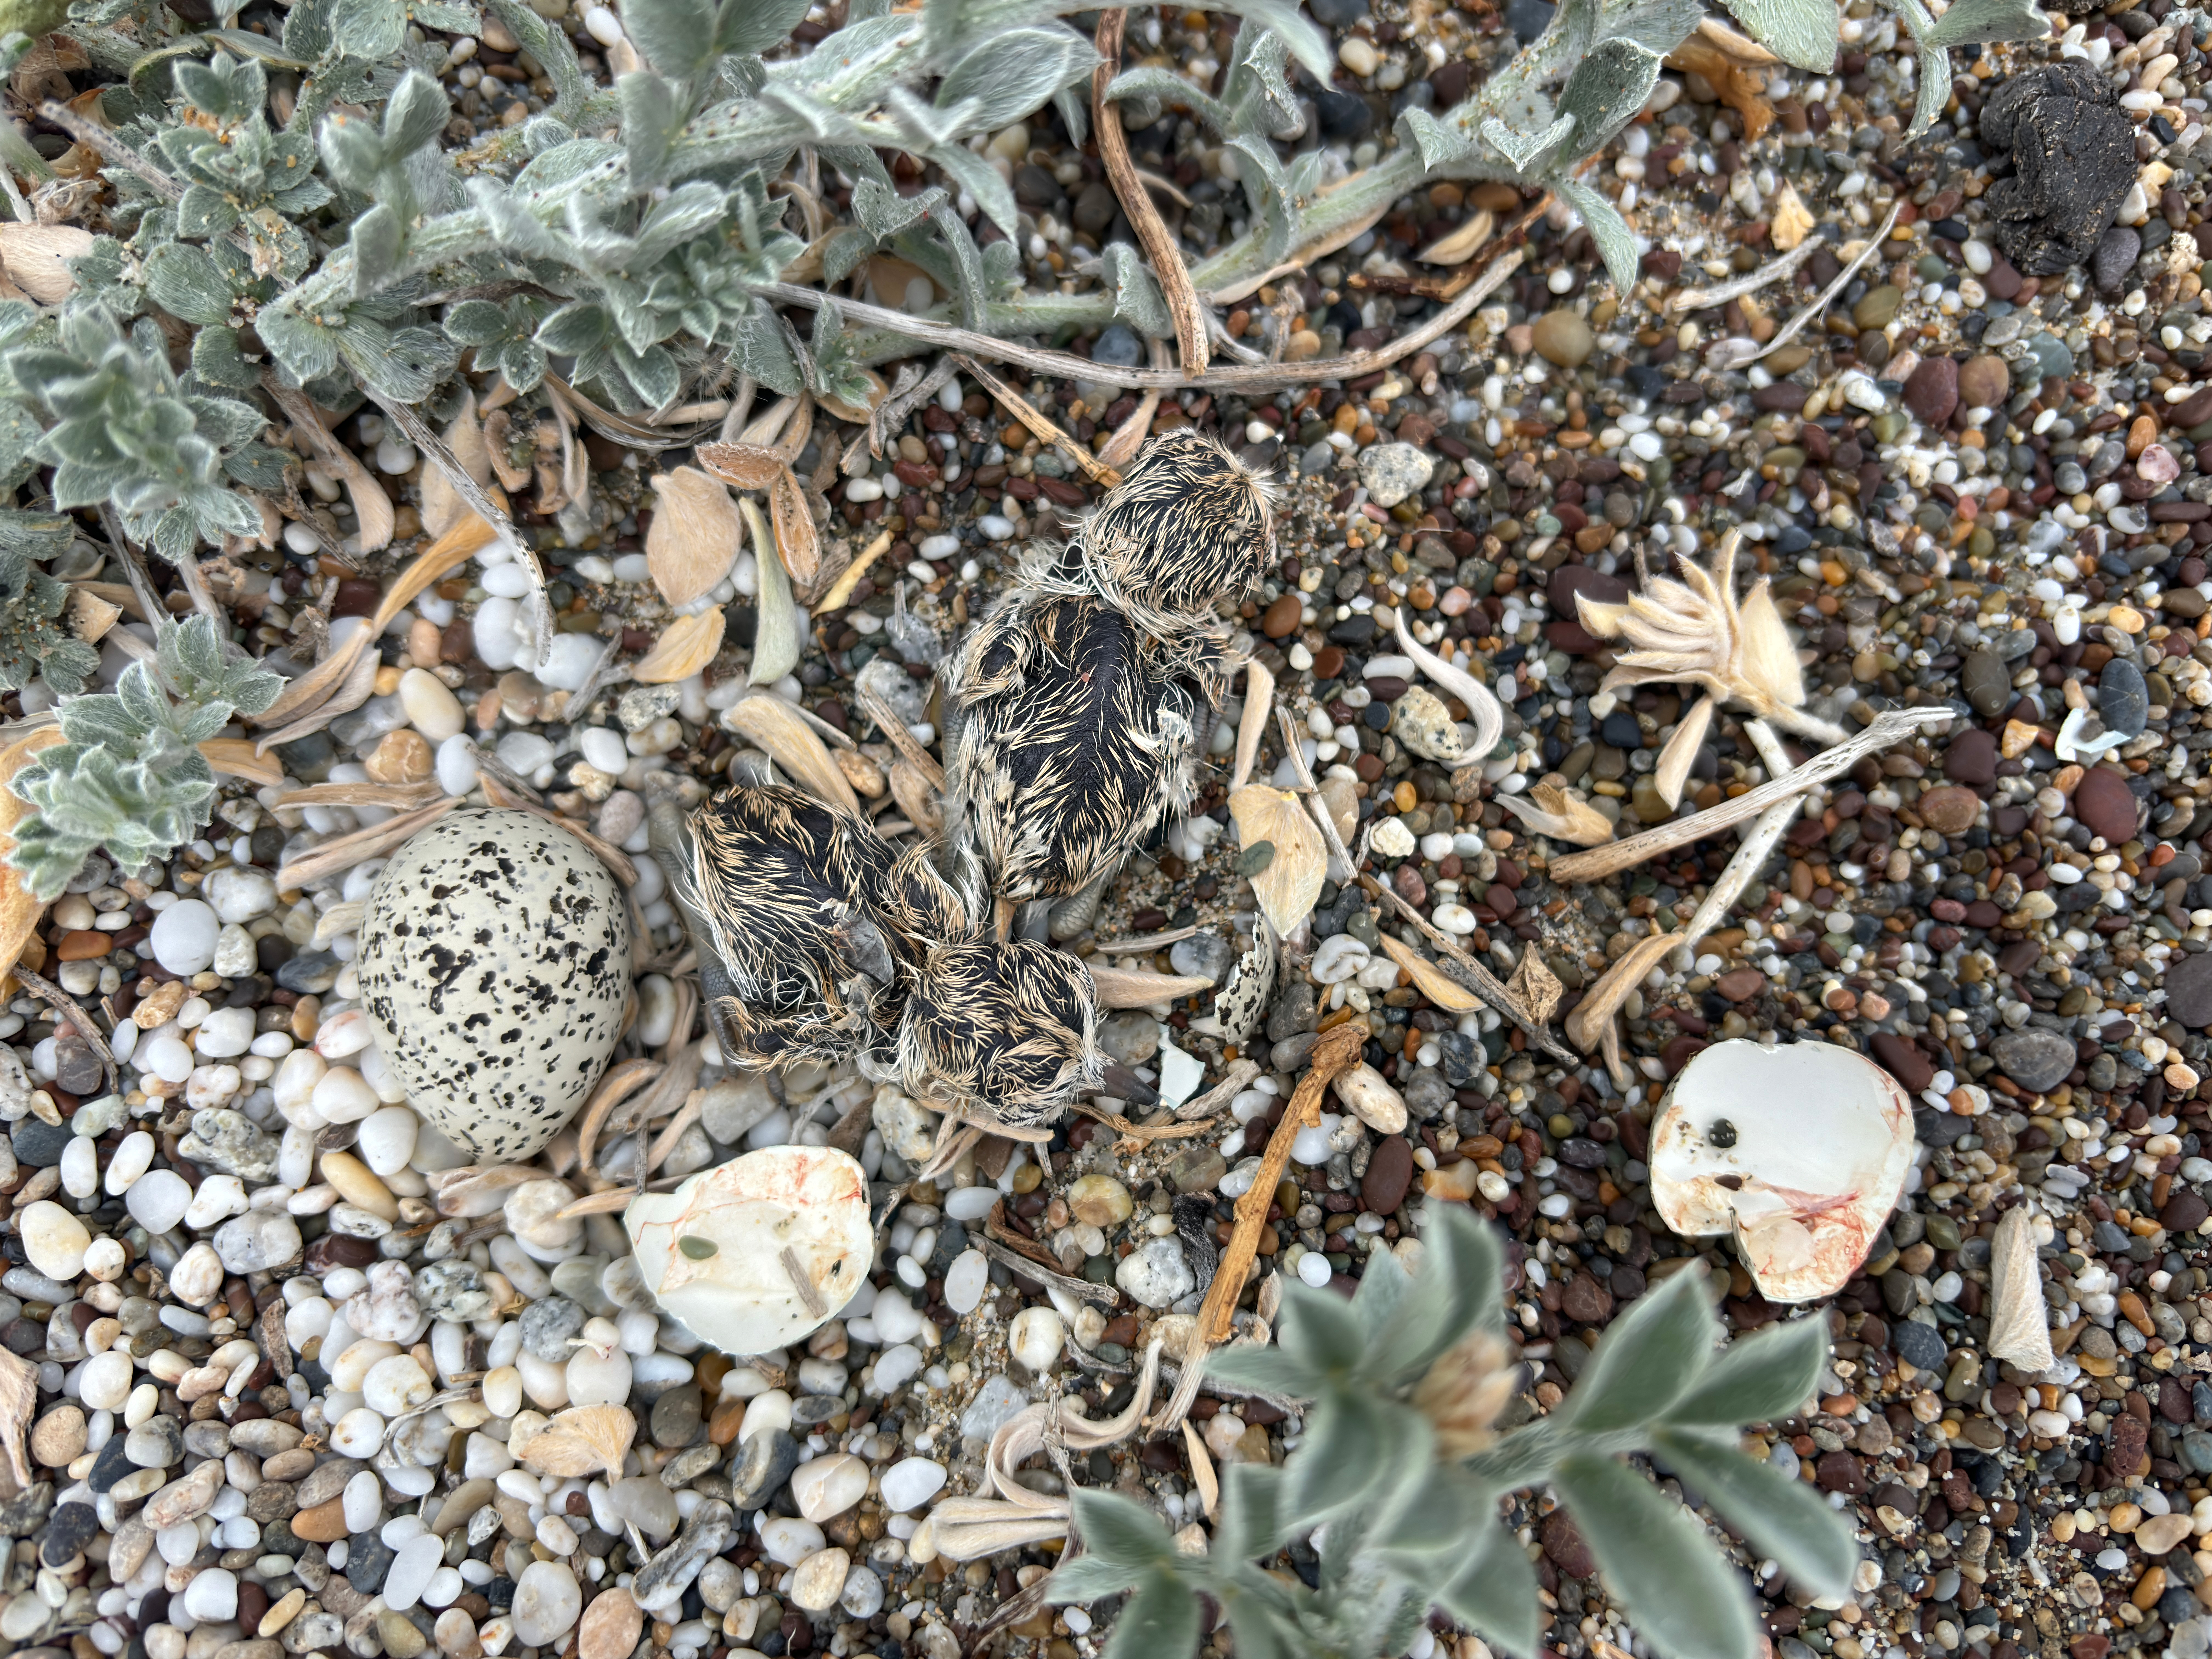 A photo of two small black-speckled, beige-colored, newly-hatched shorebird chicks and a small black-speckled, beige-colored egg sitting on sand among small bits of rocks and small grayish-green-leafed plants.